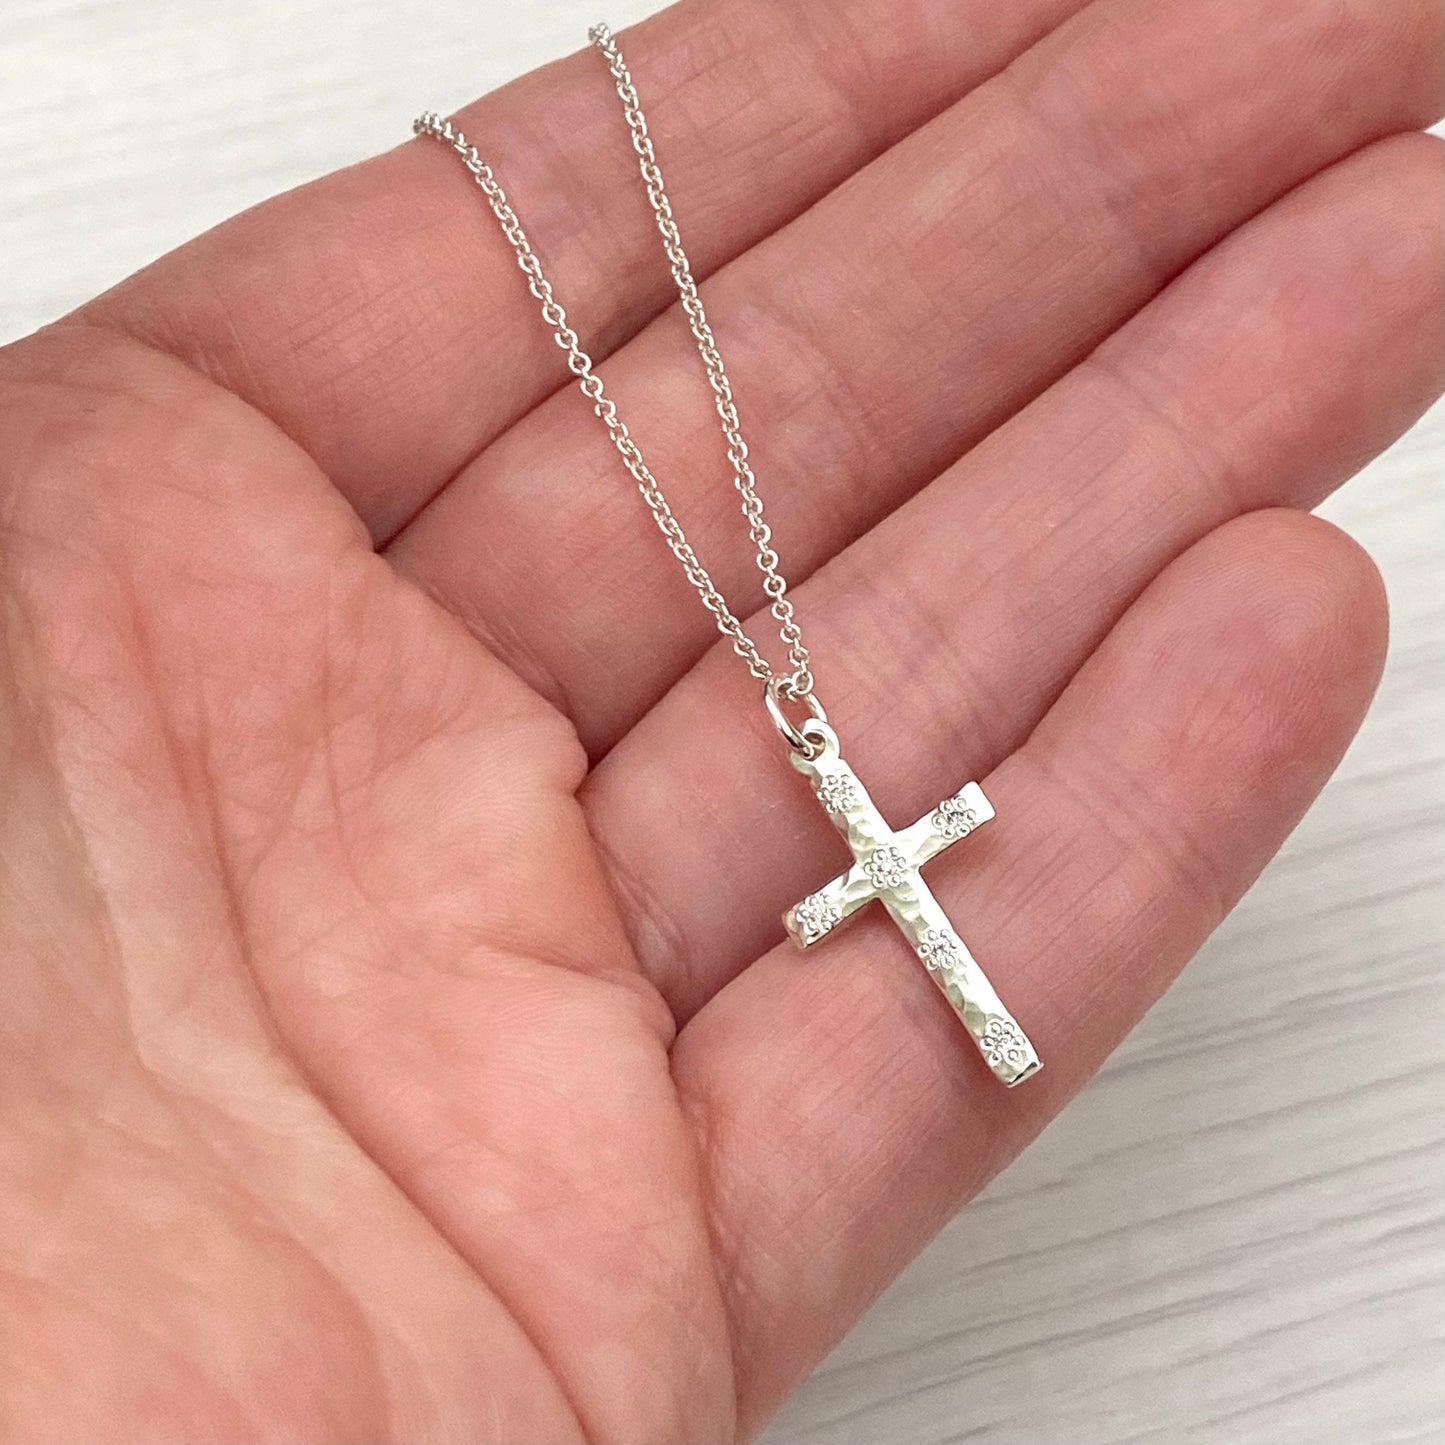 Solid silver floral set diamond hammered small cross pendant and trace chain